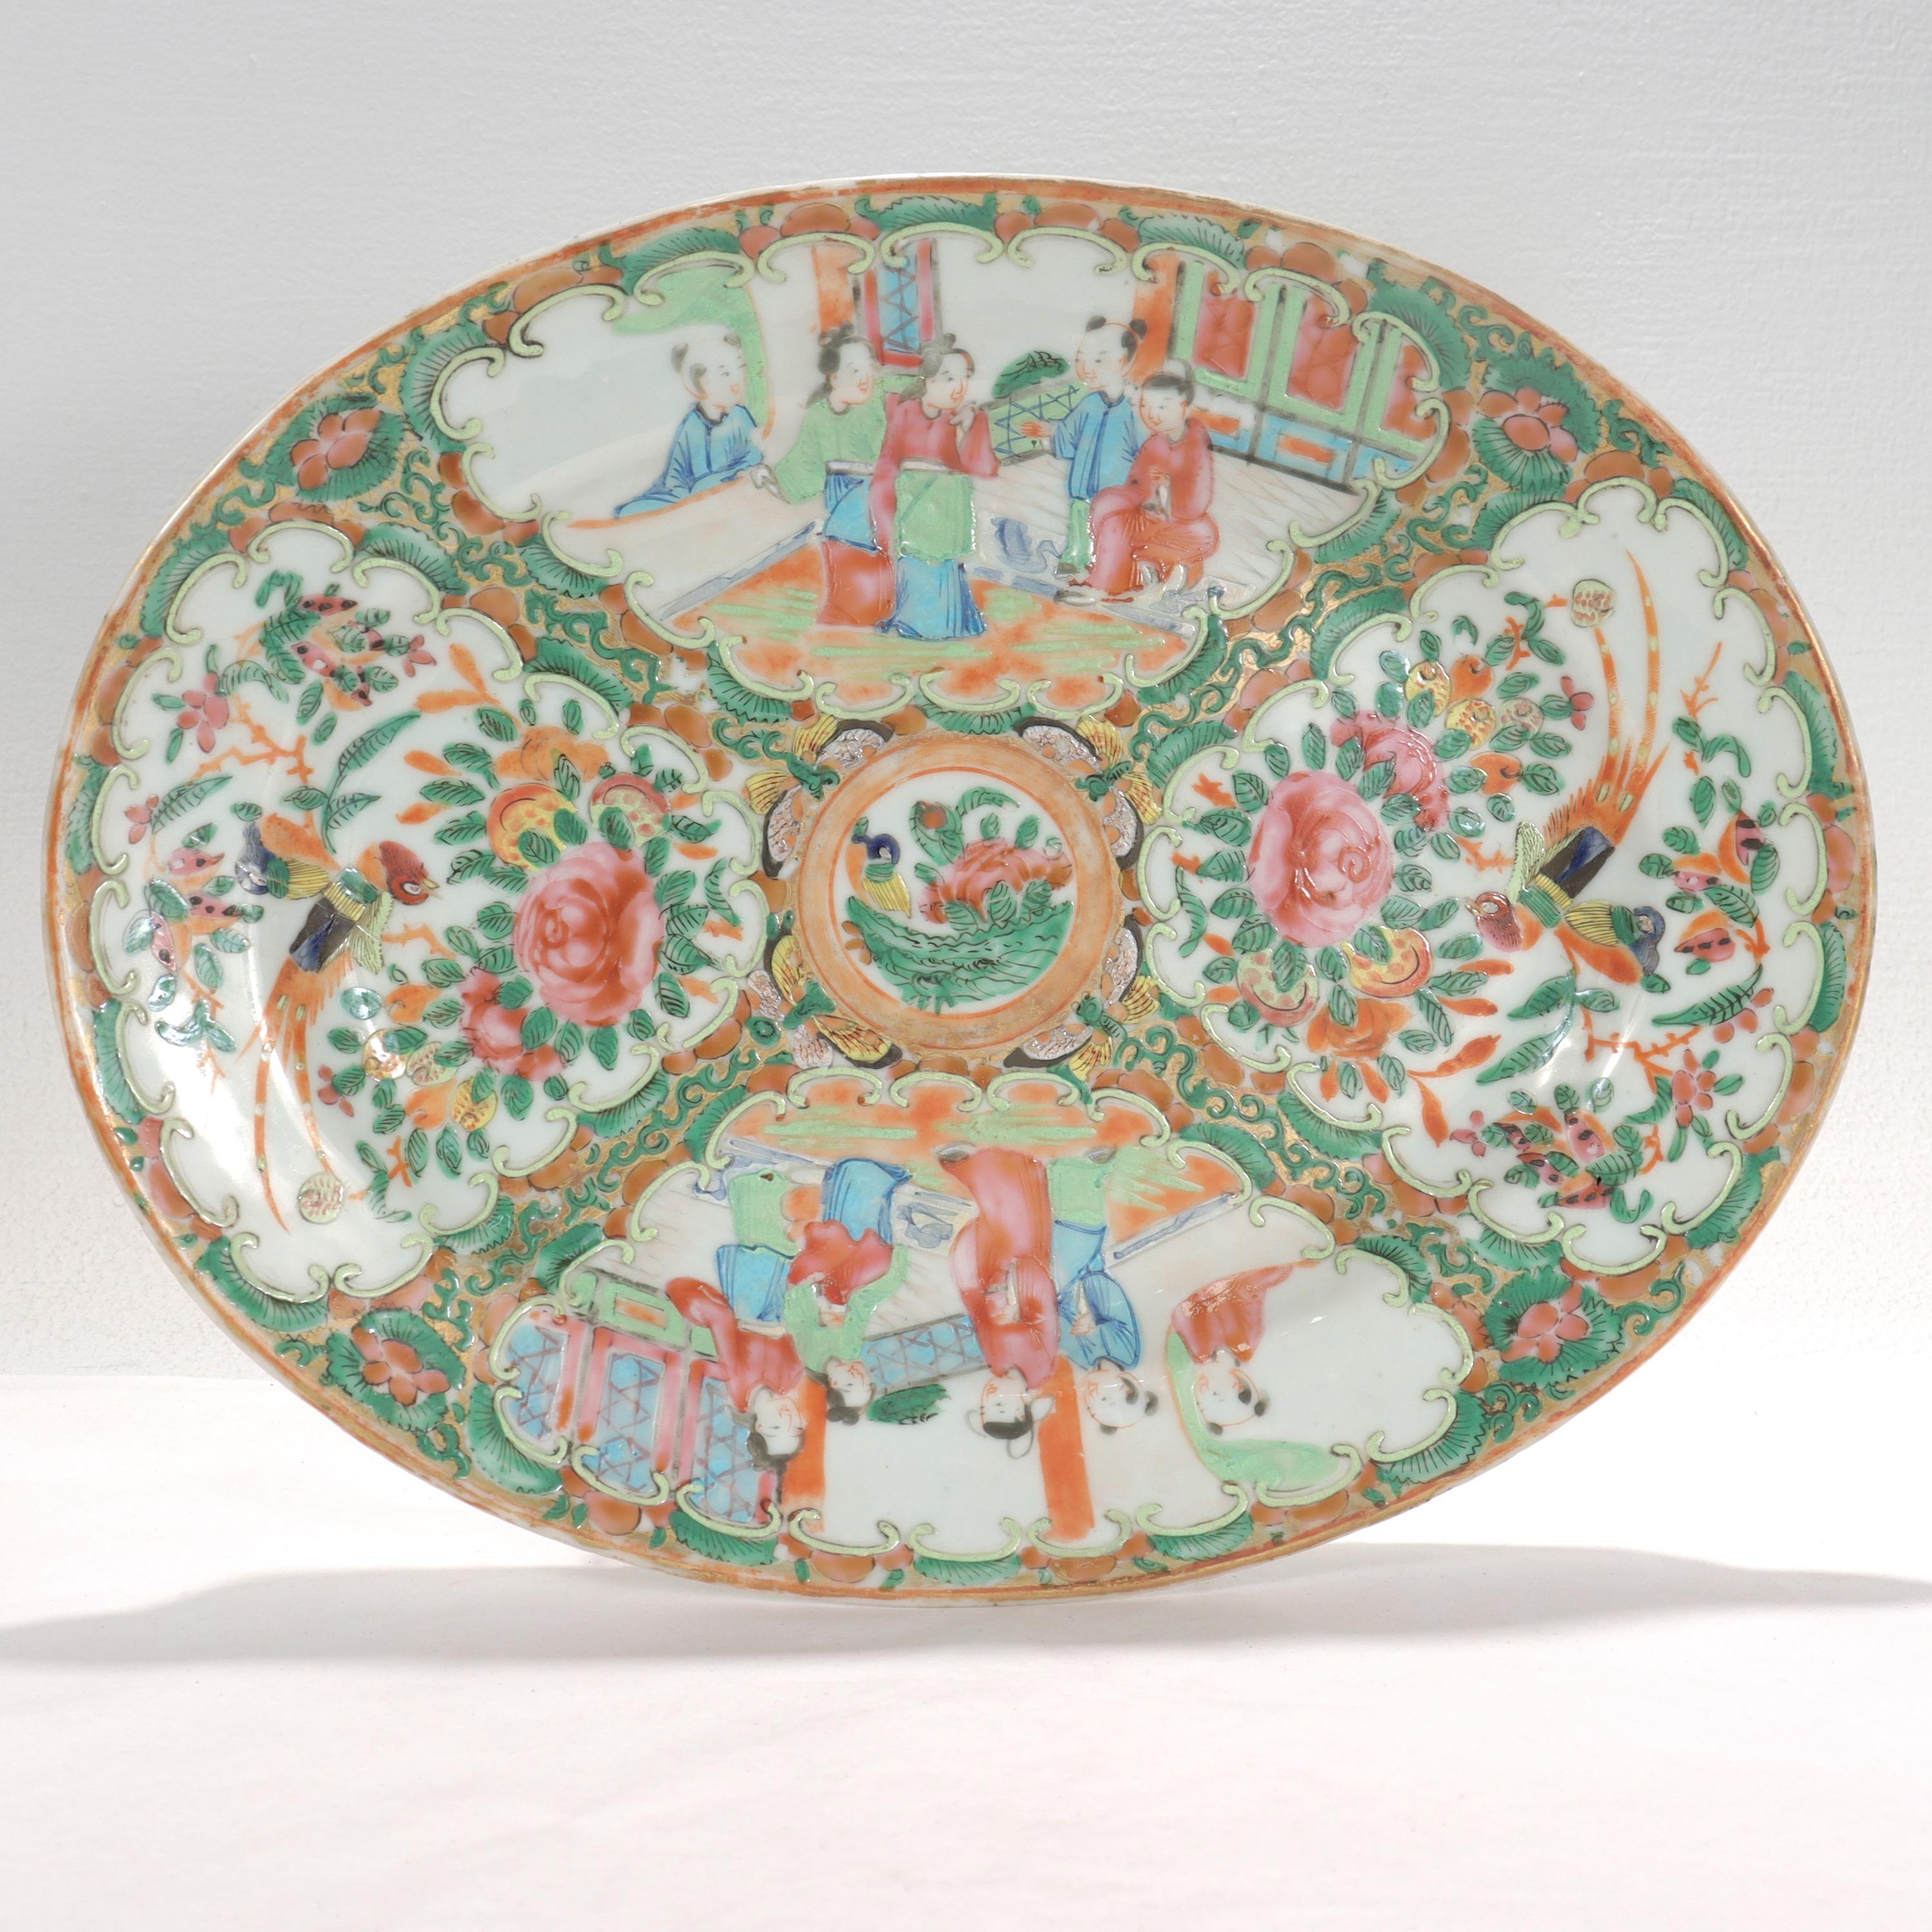 A fine antique Chinese Export porcelain

In the Rose Medallion (Famille Rose) style.

The central cartouche of the bowl depicts a floral scene. Both the interior and exterior walls of the bowl have 6 cartouches which each alternate between scenes of